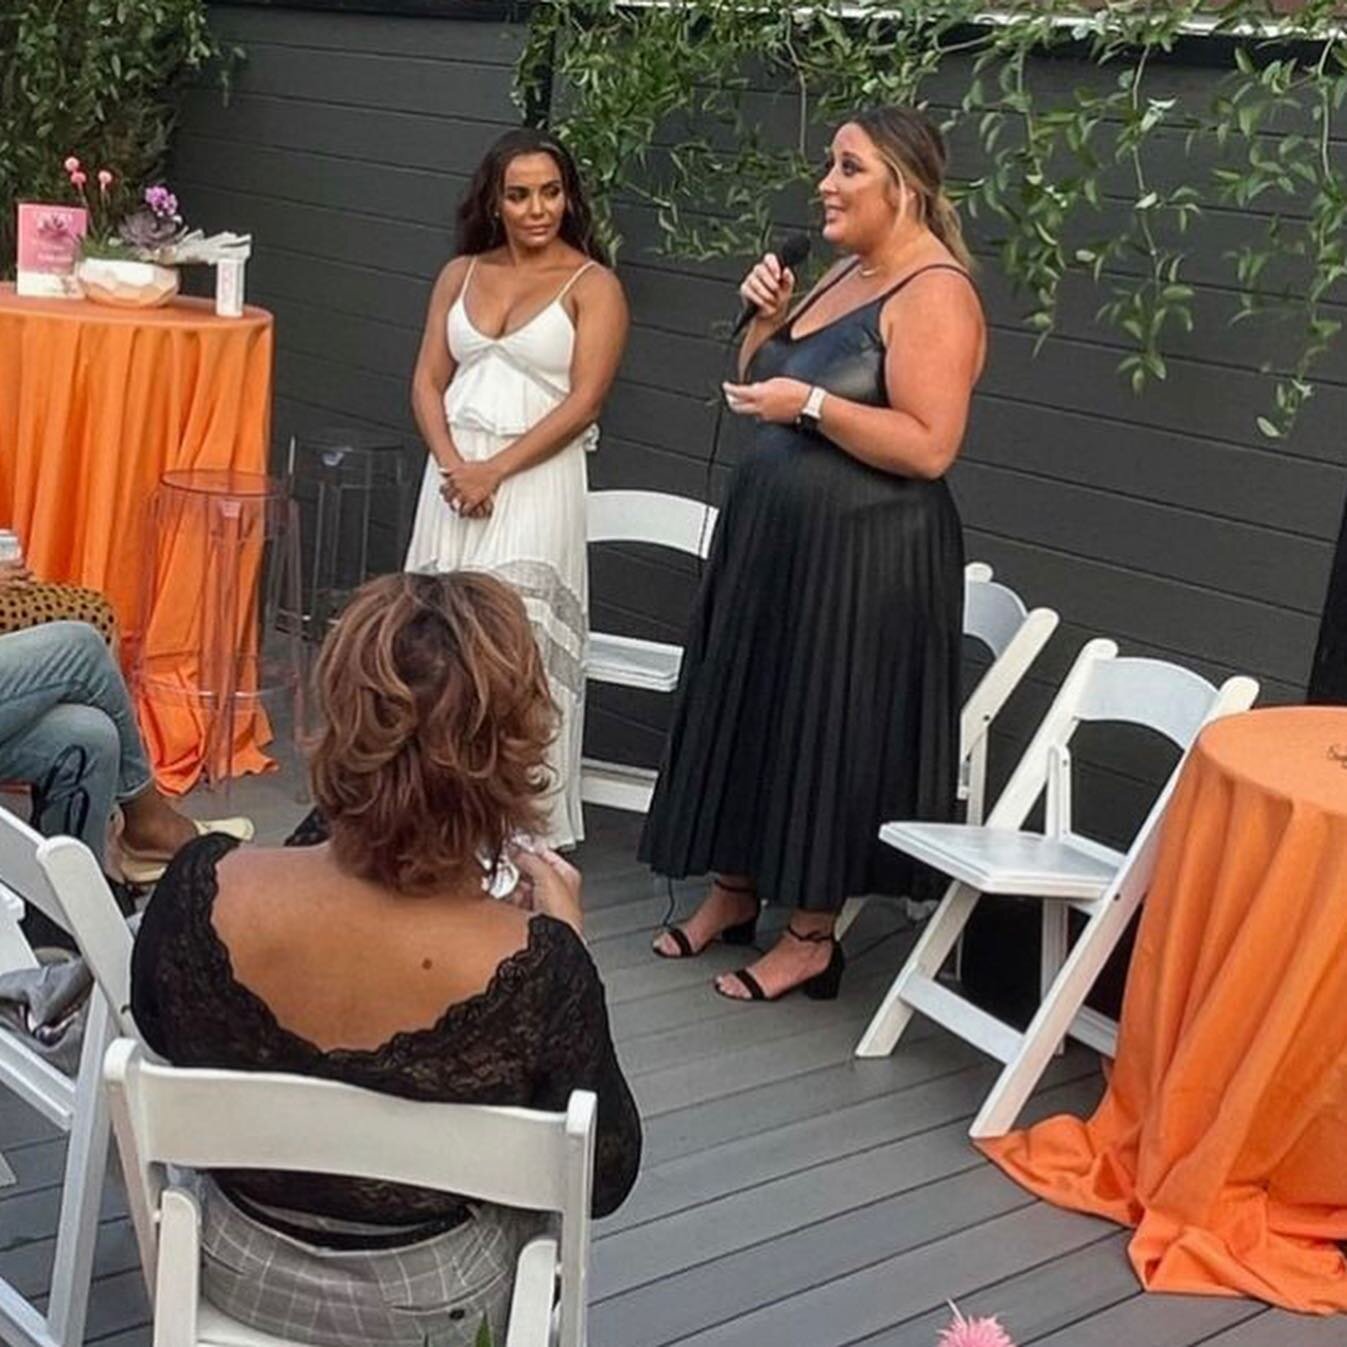 Summer Soir&eacute;e was a huge success! It was such an incredible evening connecting with amazing women. 

Boy, how I&rsquo;ve missed the conversations and inspiration that comes from surrounding myself with powerful females! 

Thank you so much to 